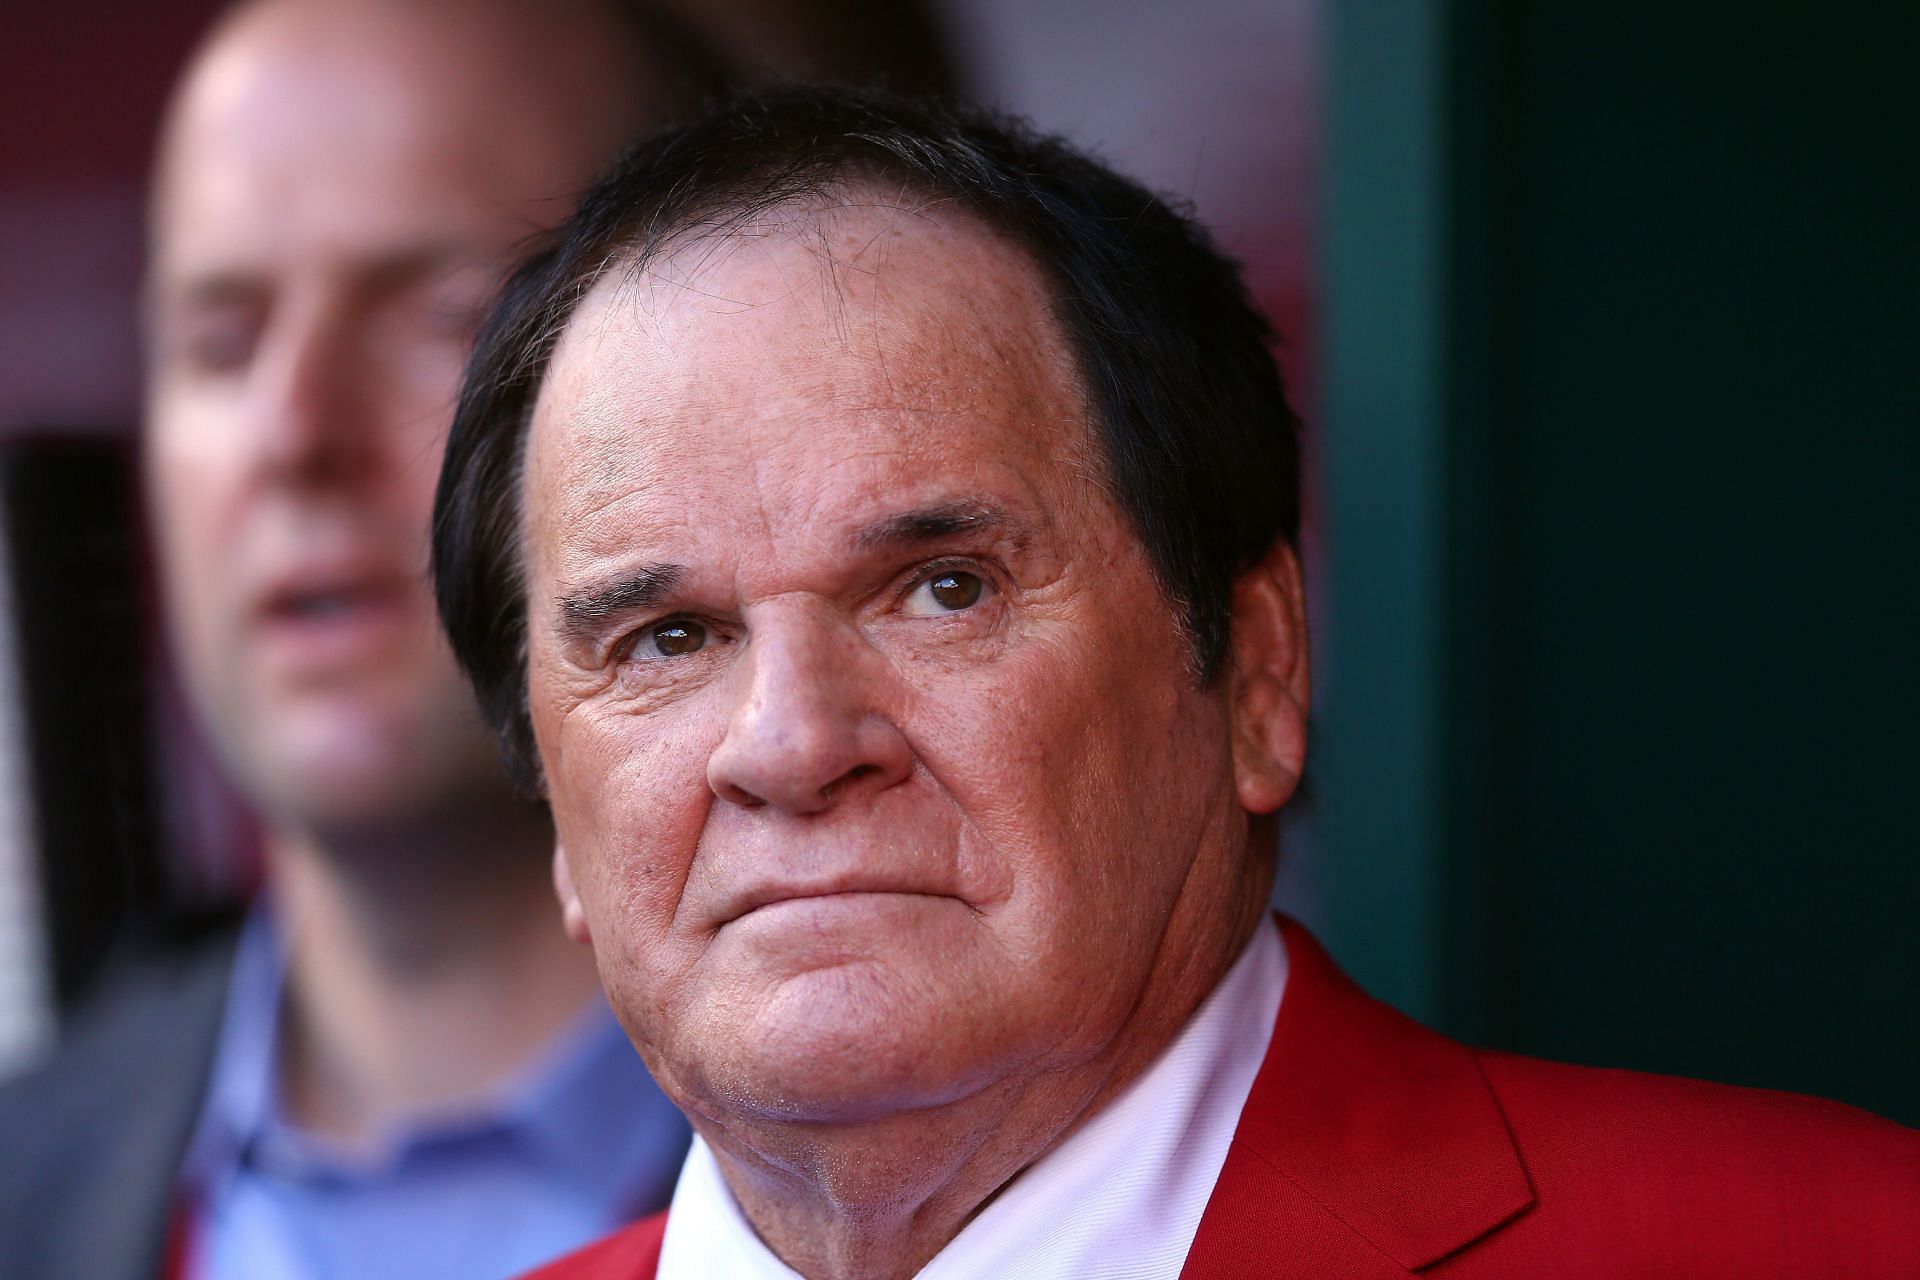 86th MLB All-Star Game: CINCINNATI, OH - JULY 14: Former player and manager Pete Rose looks on prior to the 86th MLB All-Star Game at the Great American Ball Park on July 14, 2015, in Cincinnati, Ohio. (Photo by Elsa/Getty Images)